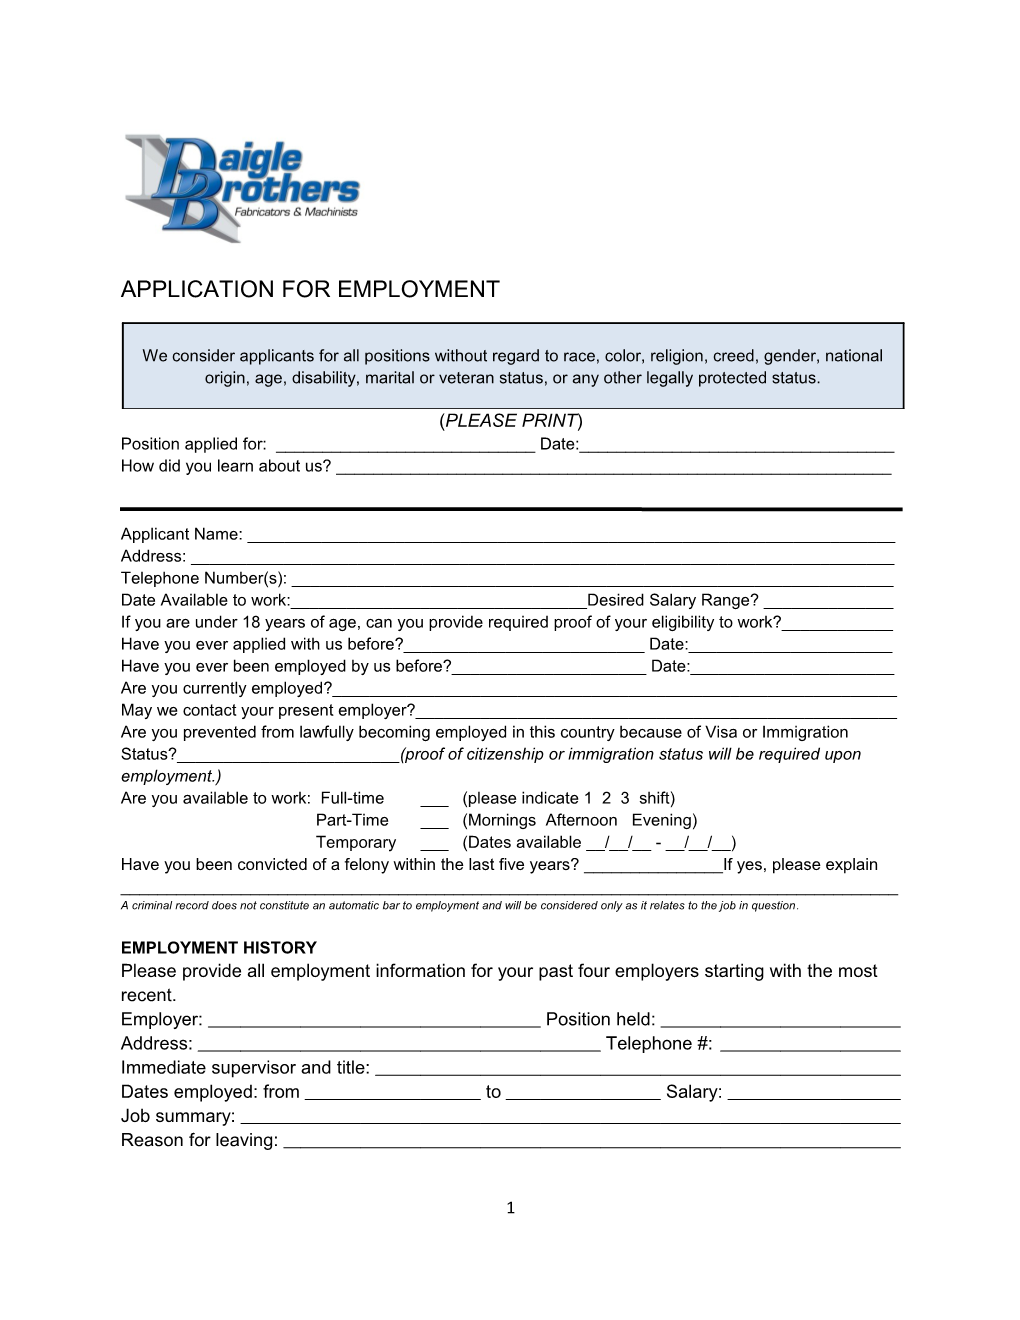 Application for Employment s44